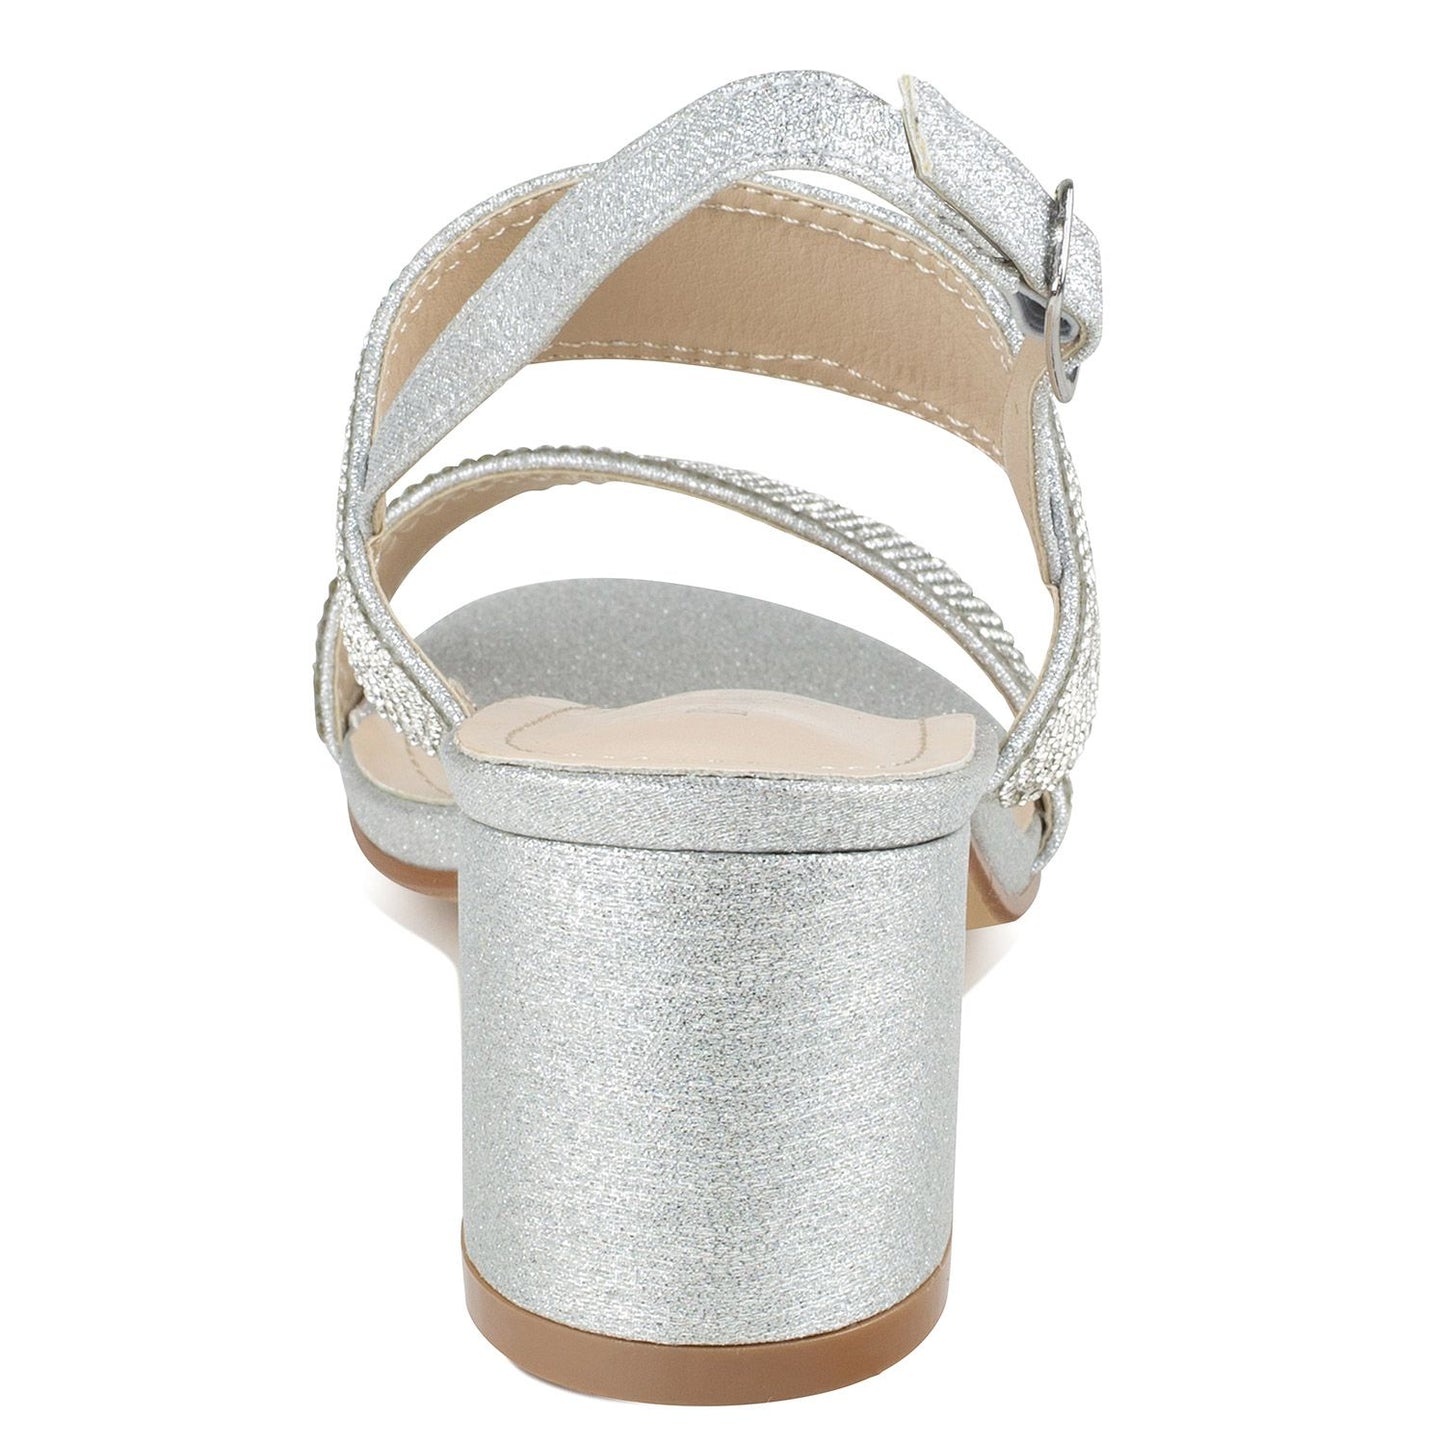 BACK VIEW OF SILVER GLITTER SHOE WITH WIDE BANDS AND 2 INCH BLOCK HEEL